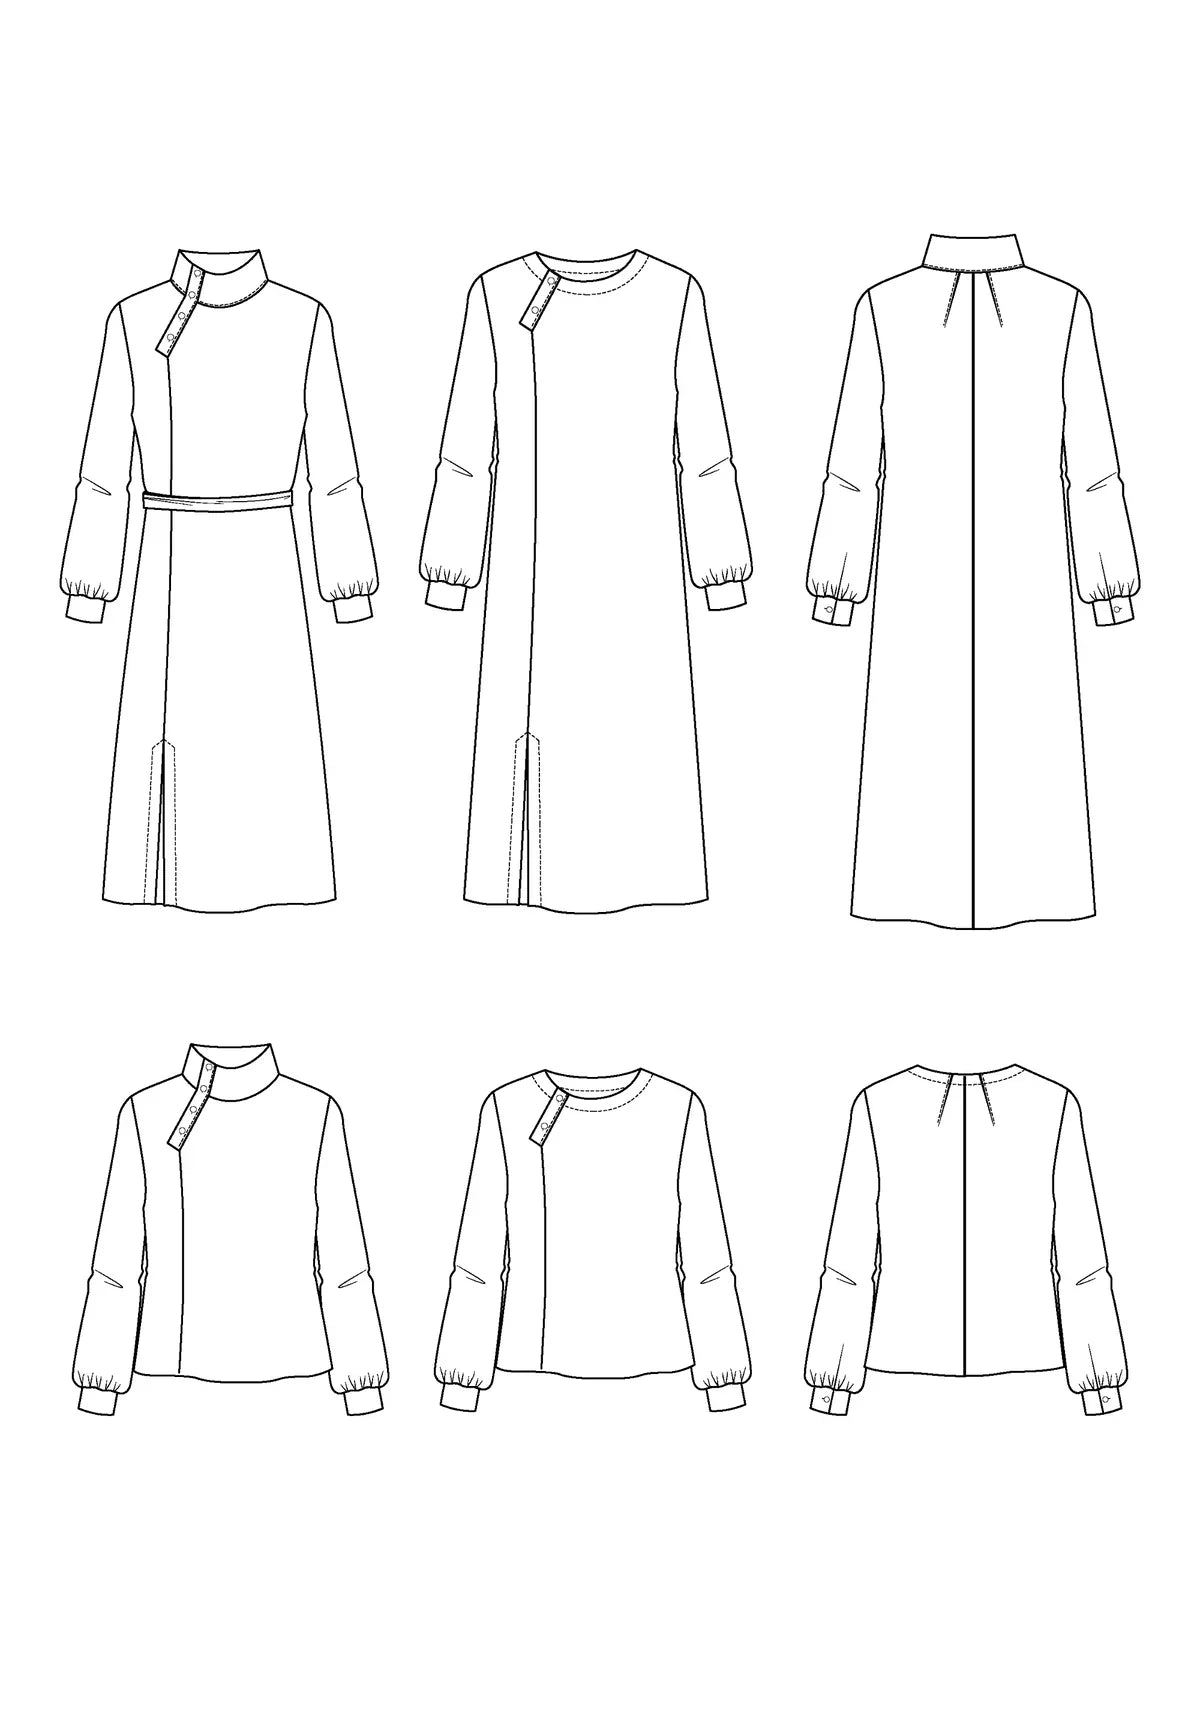 SOLIFLORE Dress and Blouse Sewing Pattern by Maison Fauve